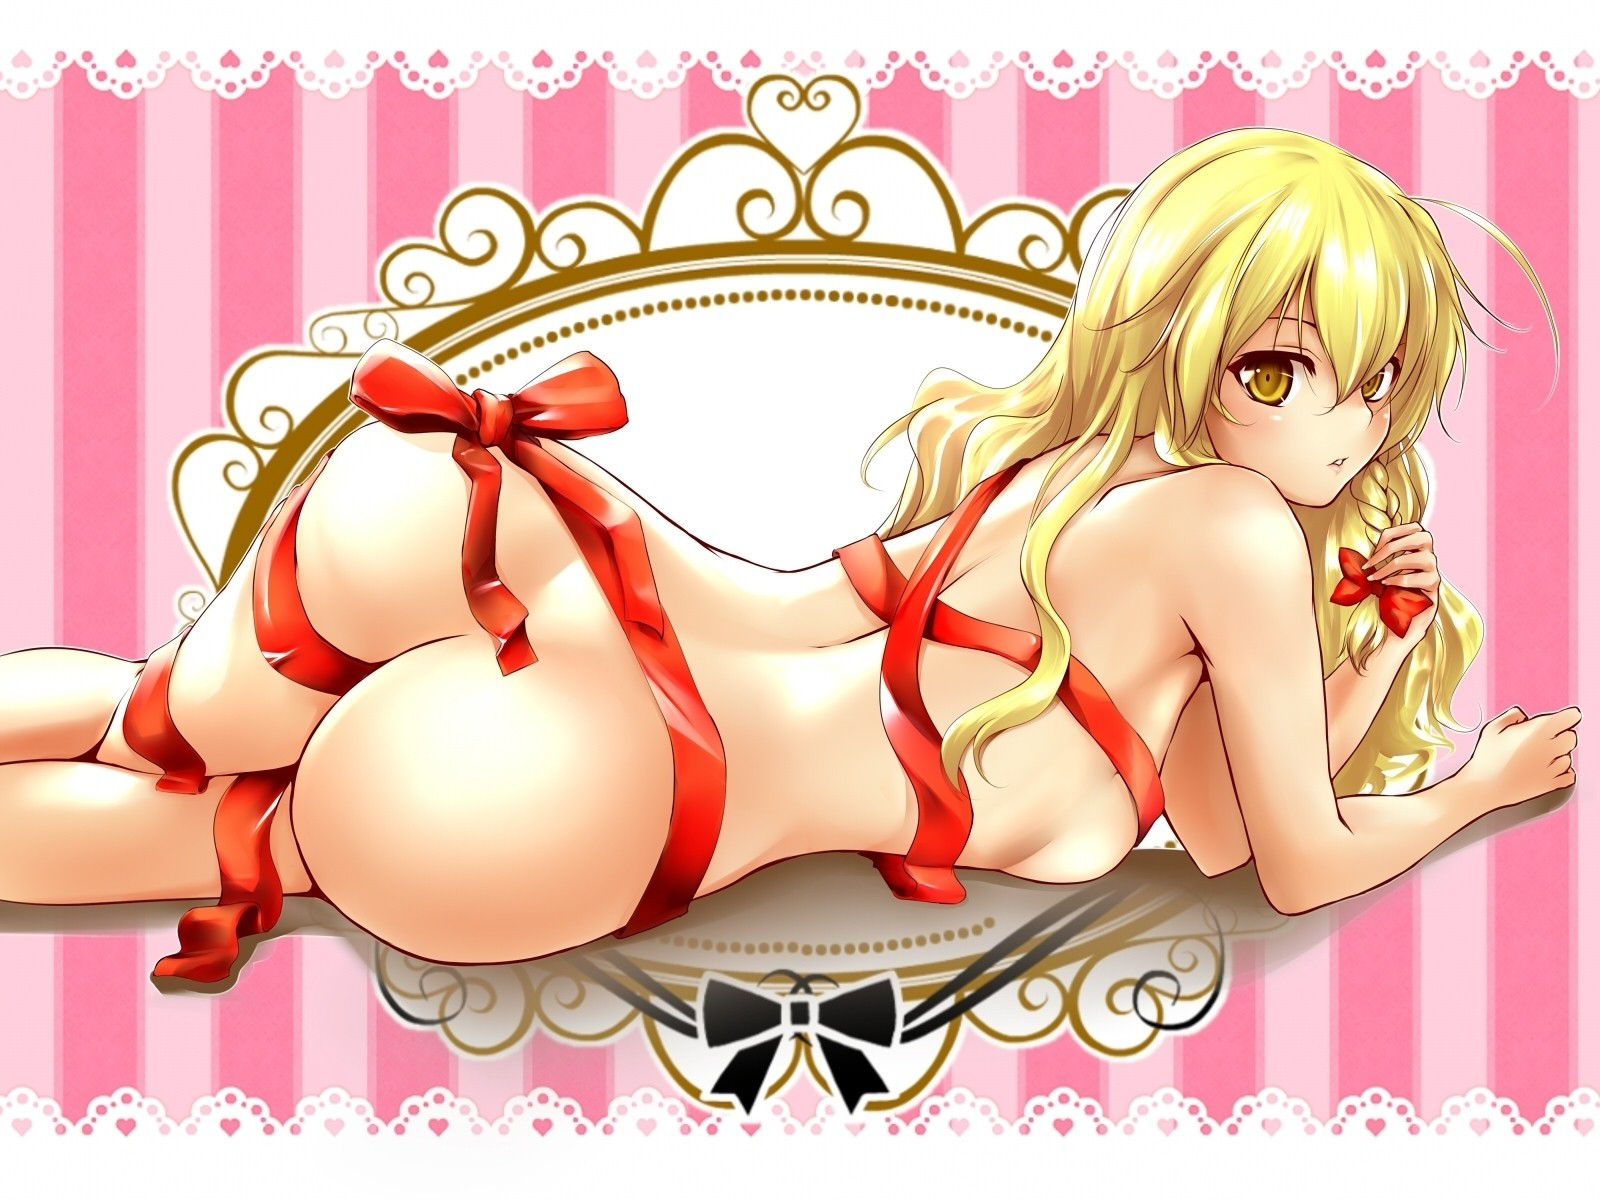 2D Erotic images summary of girls wrapped in ribbon 47 sheets 8